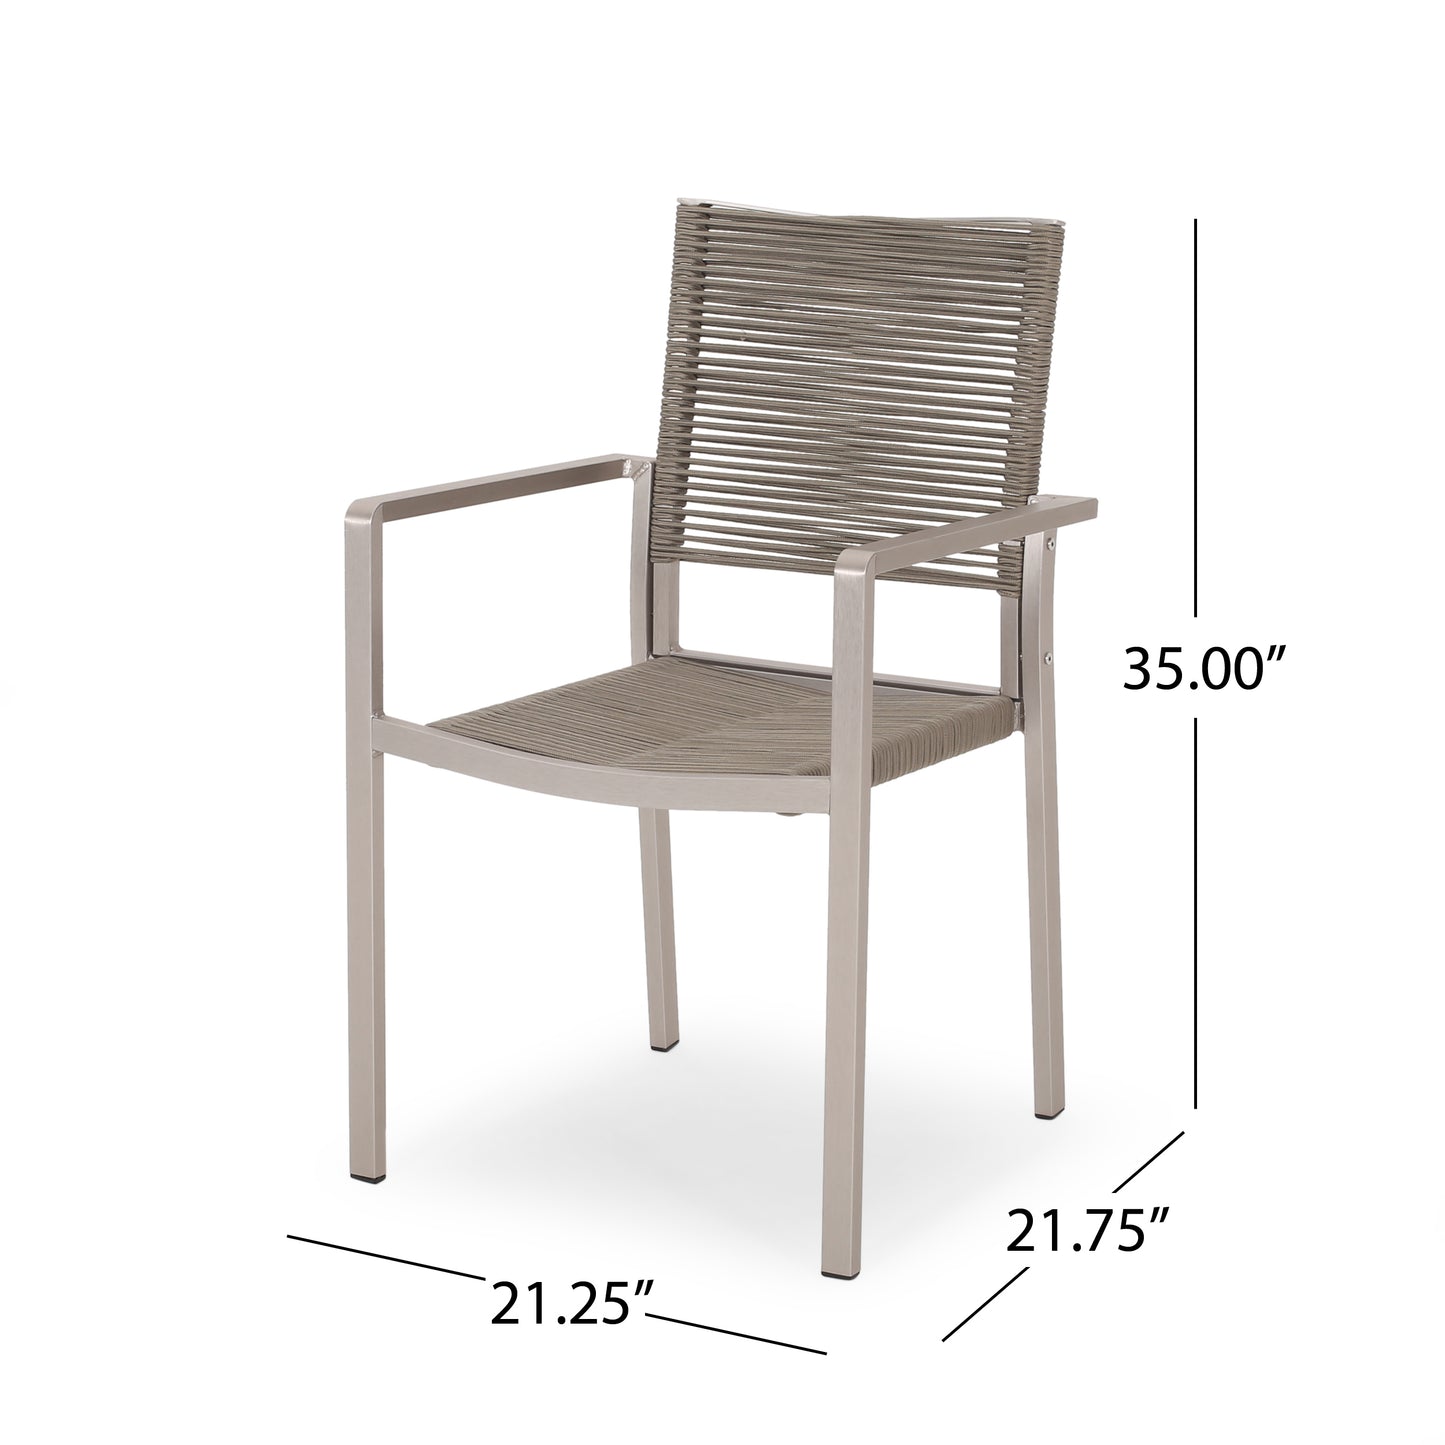 Lillian Outdoor Modern Aluminum Dining Chair with Rope Seat (Set of 2)